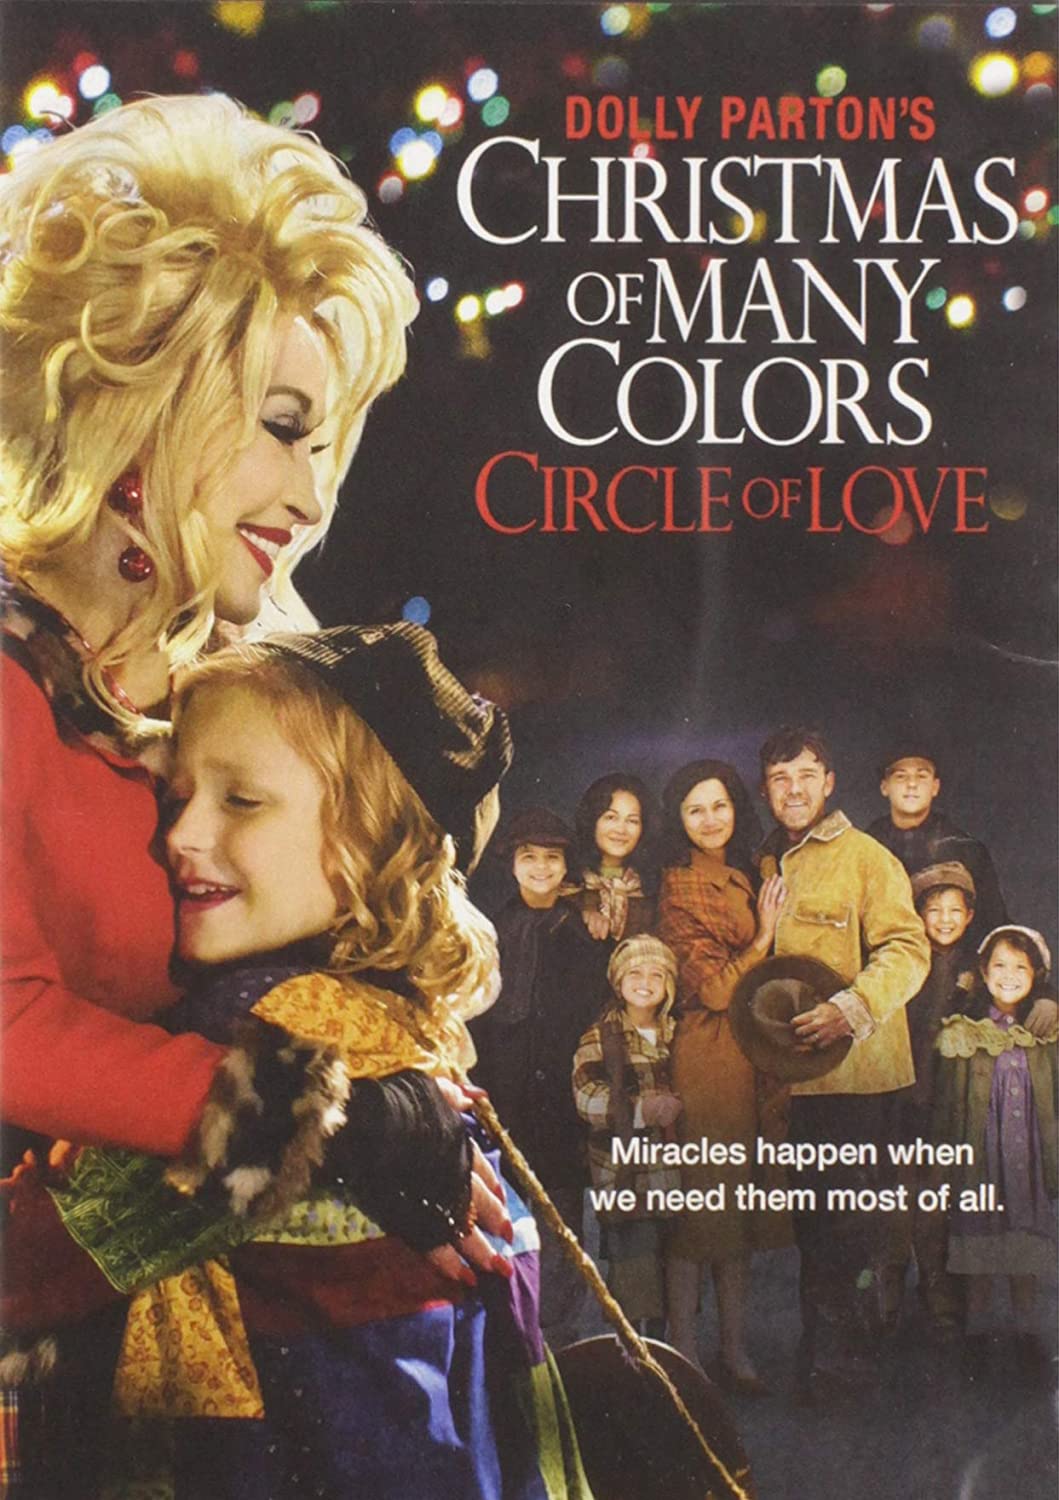 AFTERNOON MOVIE: Christmas of Many Colors | Sachem Public Library